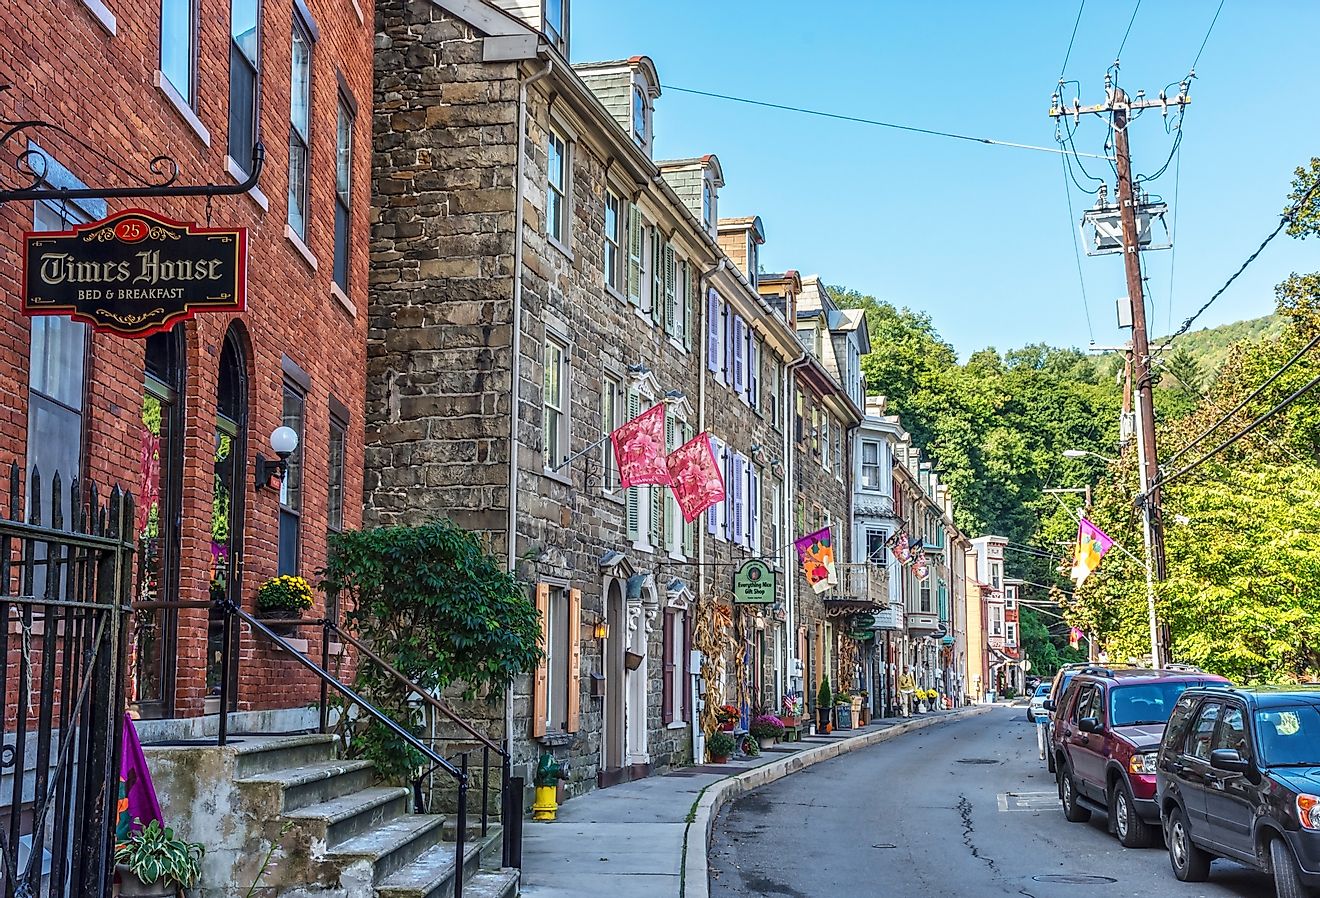 Historic row homes with shops on Race St in Jim Thorpe Pennsylvania. Image credit Andrew F. Kazmierski via Shutterstock